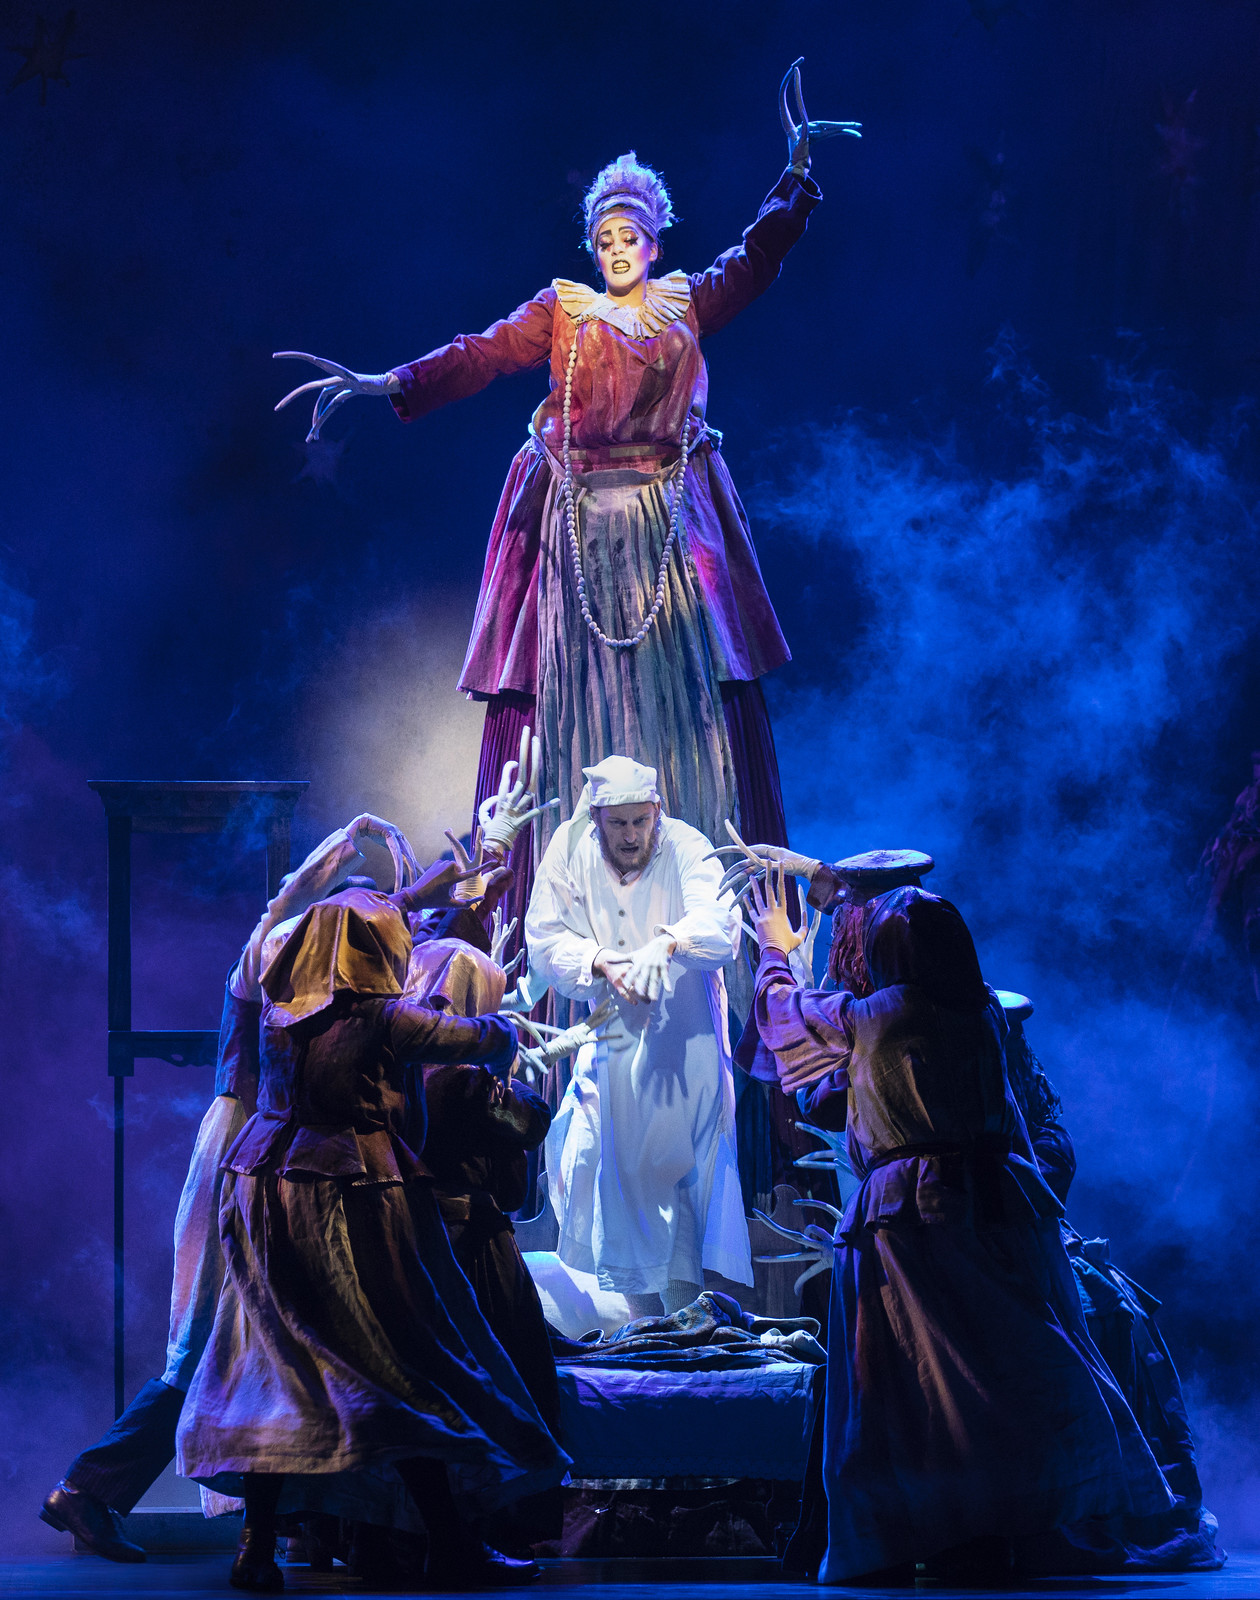 Photo: Joan Marcus || Wading in Big Shoes - Broadway in Detroit: 'Fiddler on the Roof' at the Fisher Theatre March 10 - 15, 2020